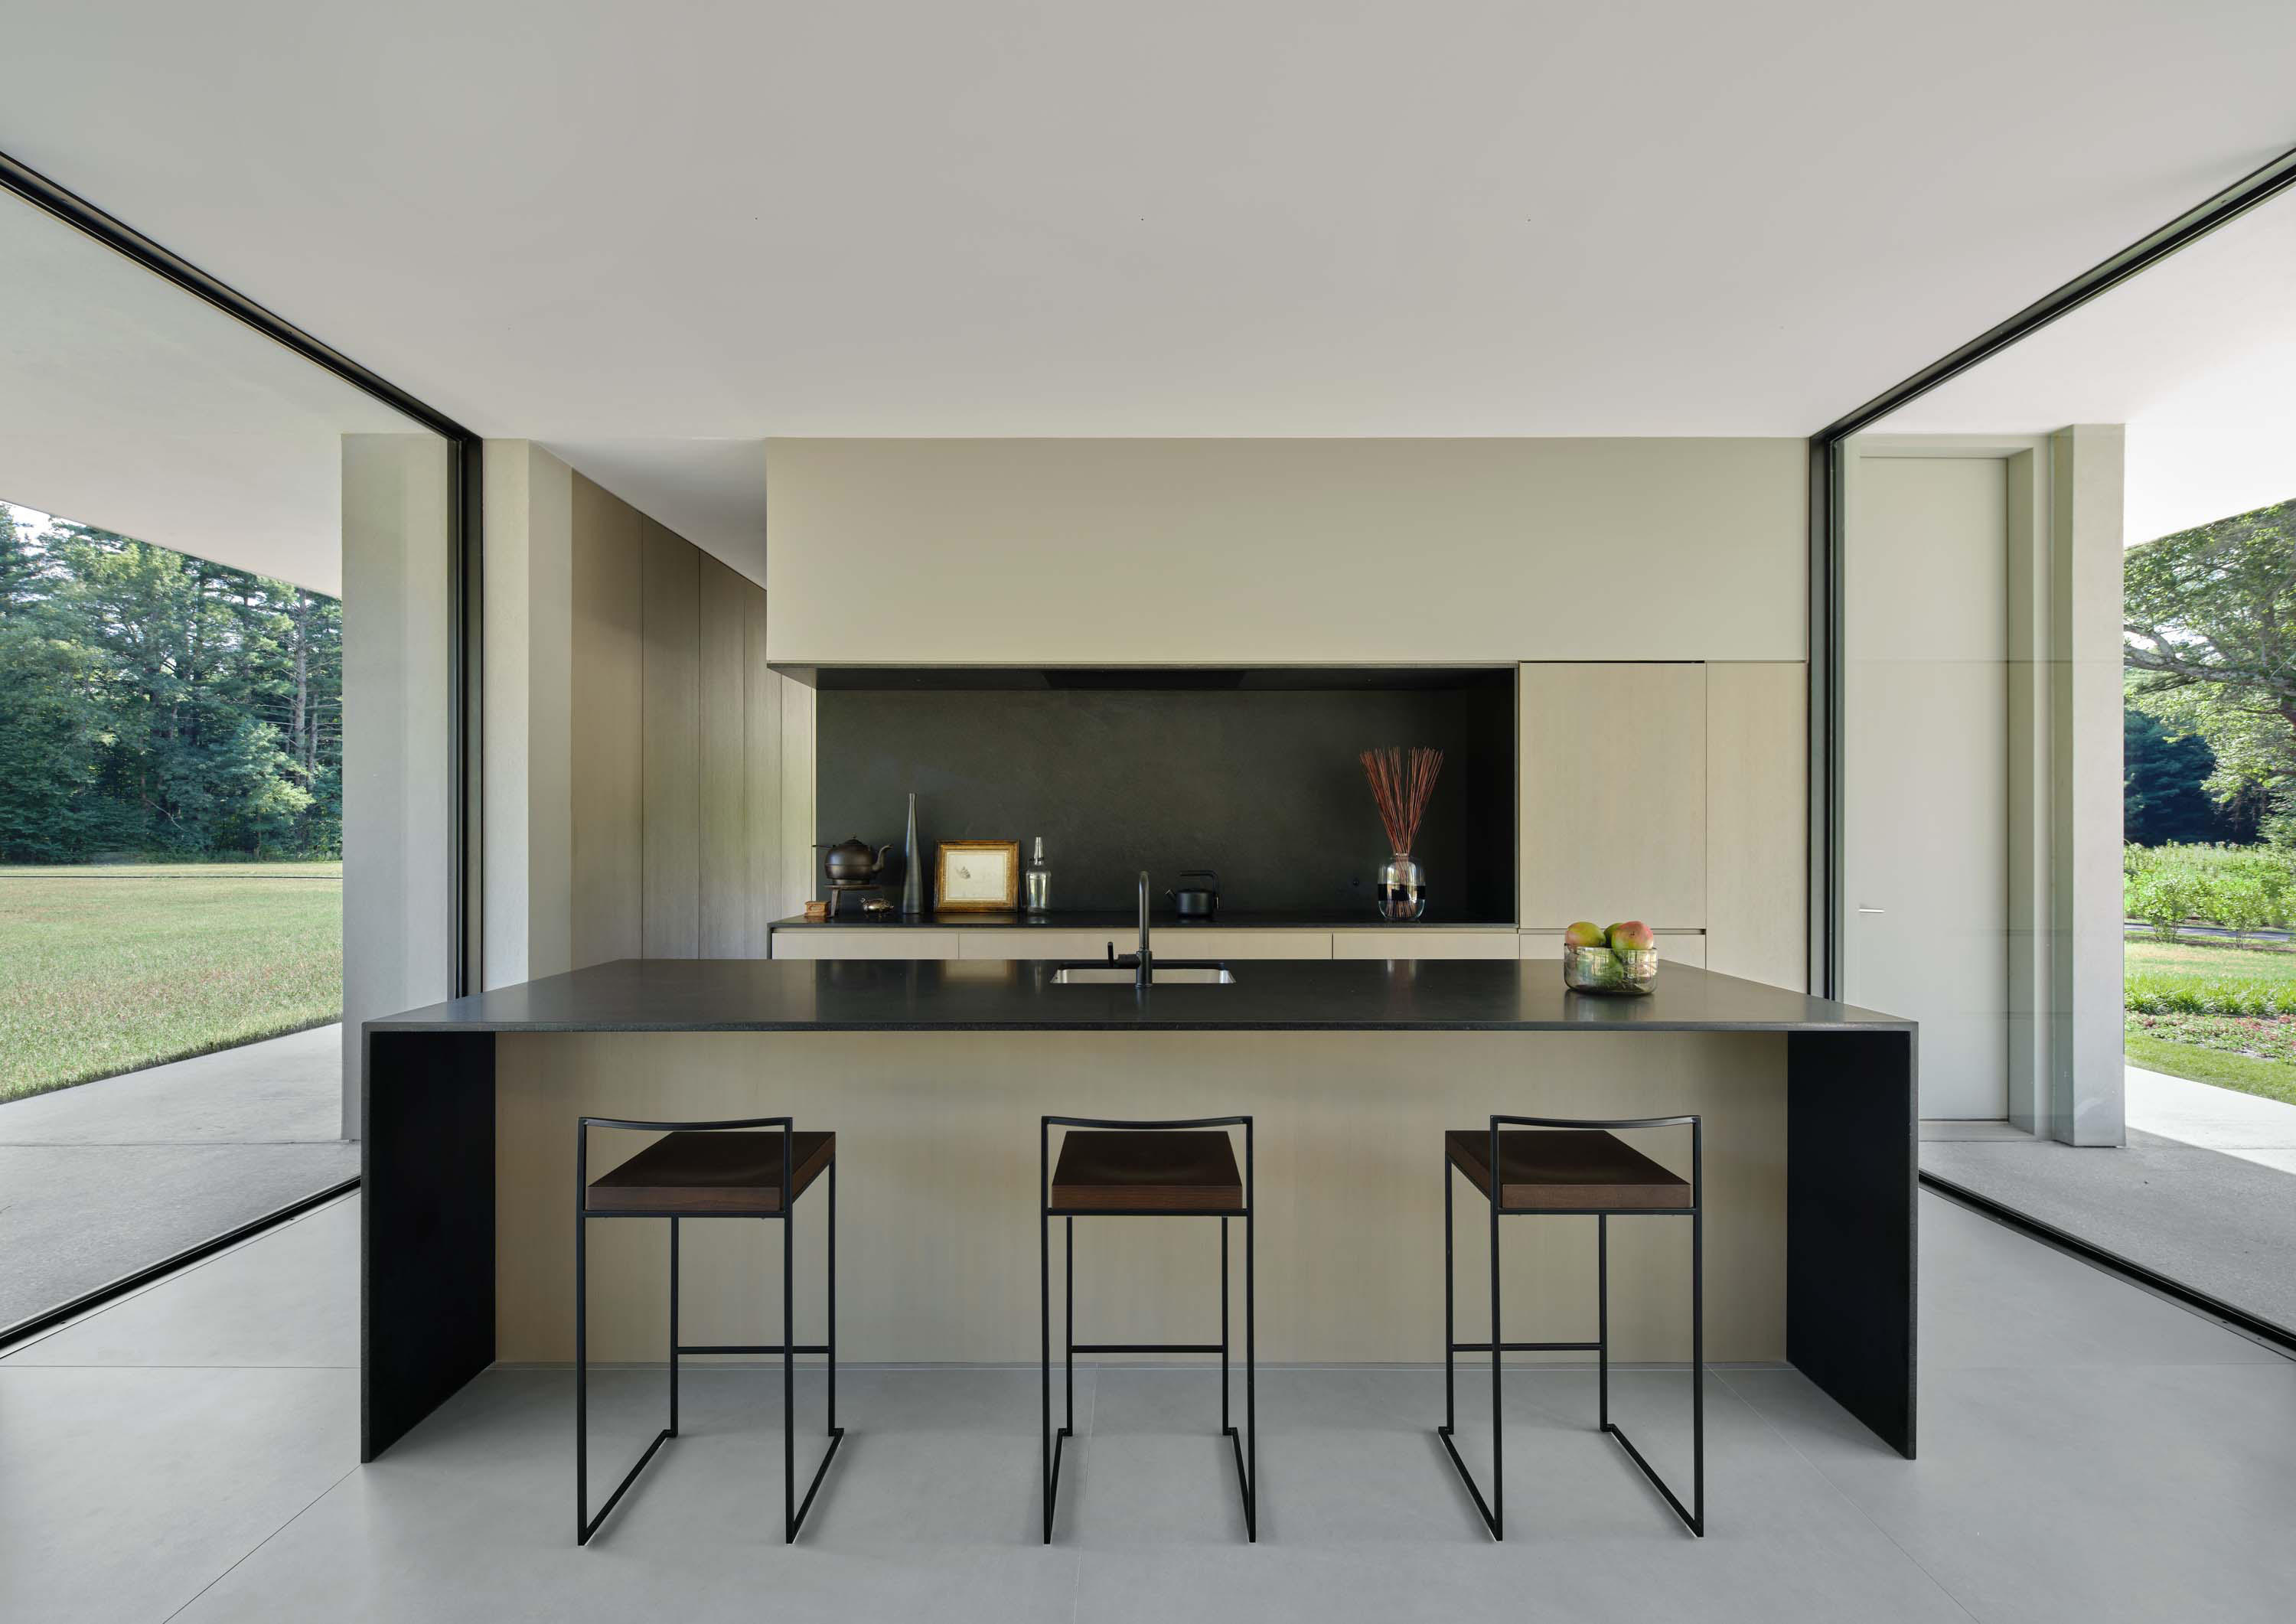 Interior photo of the Casa Annunziata Residence by Specht Novak Architects. Shot by Dror Baldinger, featuring the island kitchen, glass walls, and open space.